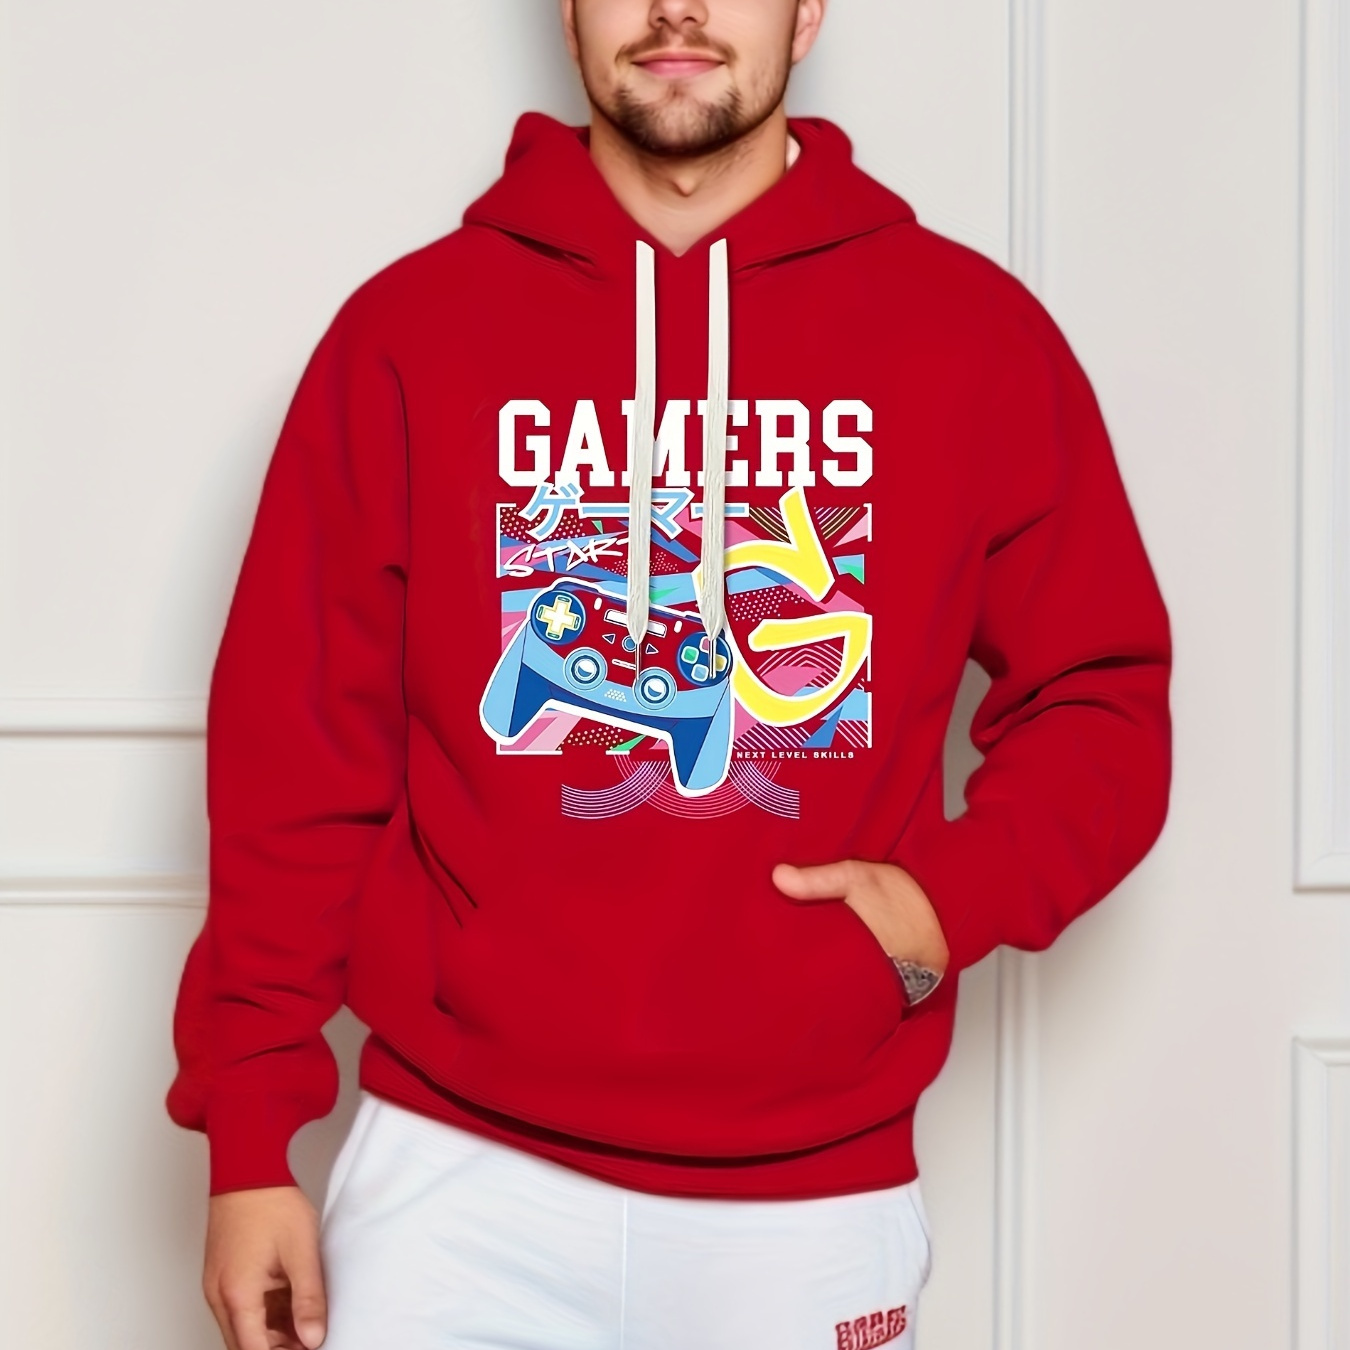 

Game Console Print Hoodie, Cool Hoodies For Men, Men's Casual Pullover Hooded Sweatshirt With Kangaroo Pocket Streetwear For Winter Fall, As Gifts